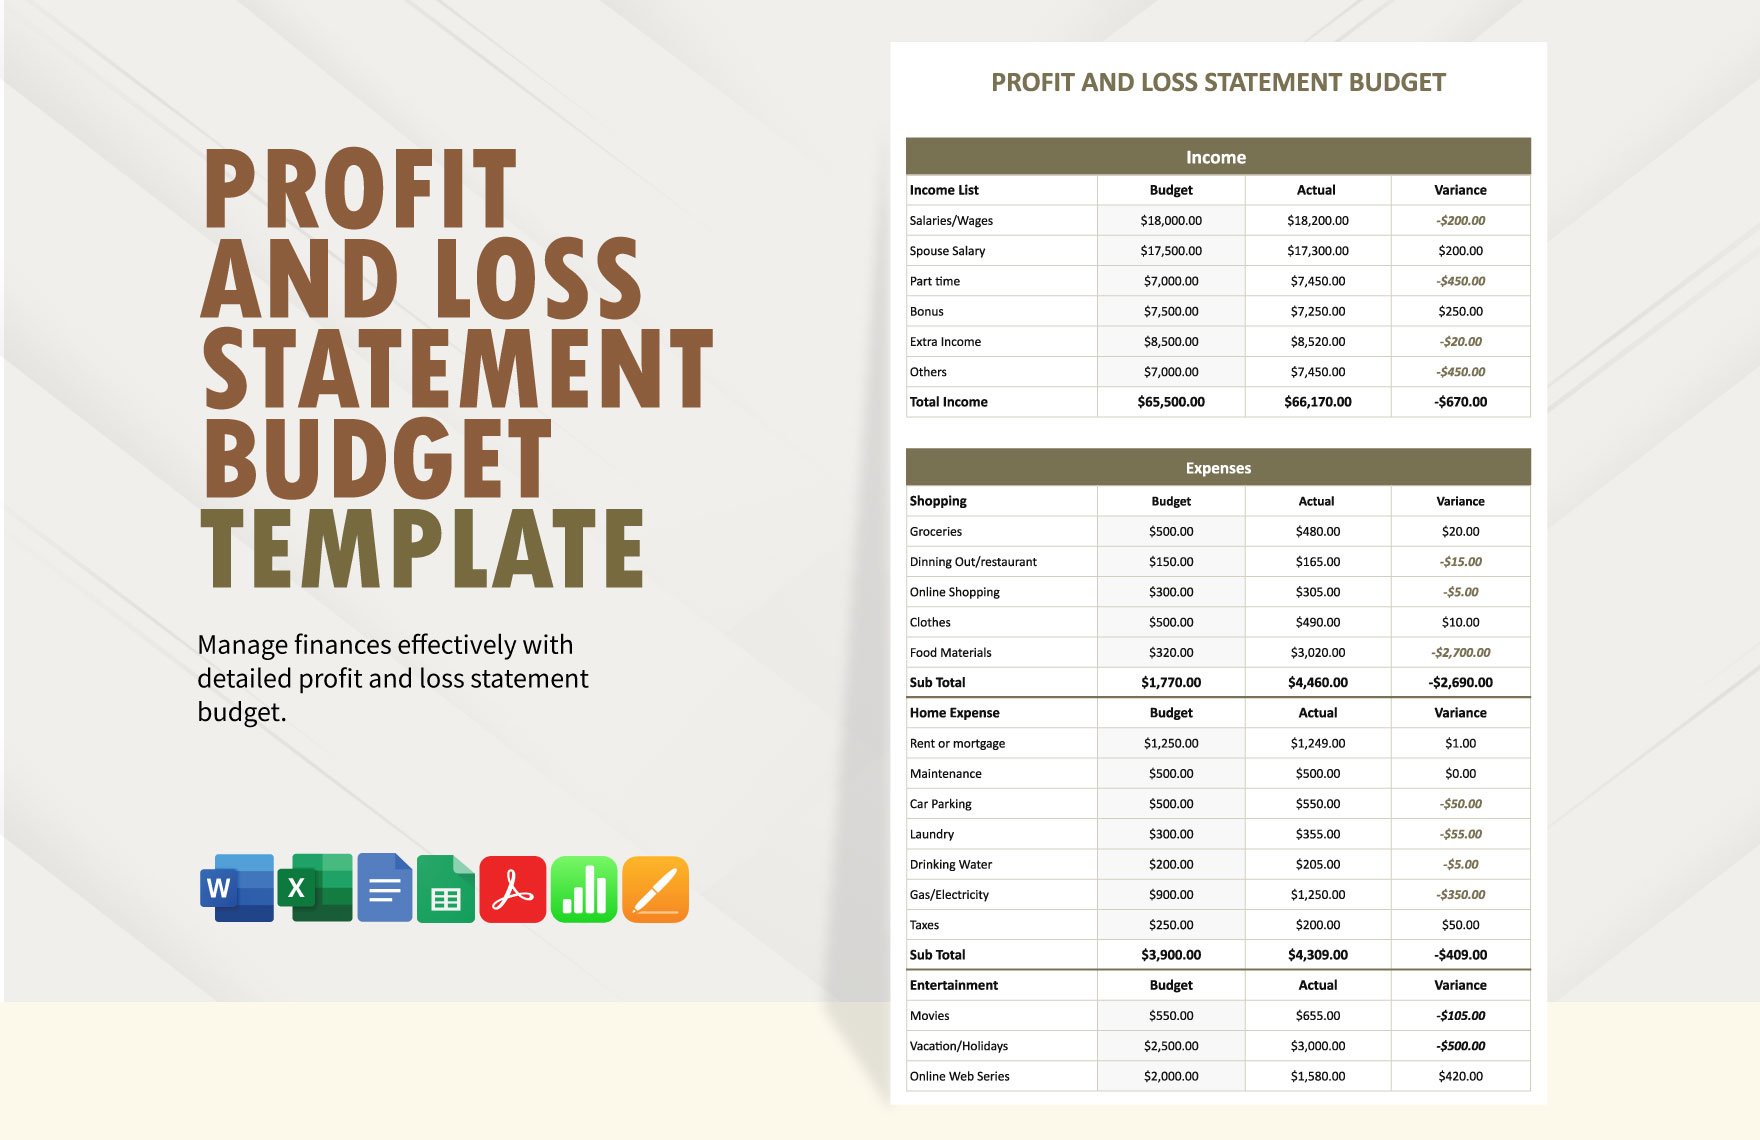 Profit and Loss Statement Budget Template